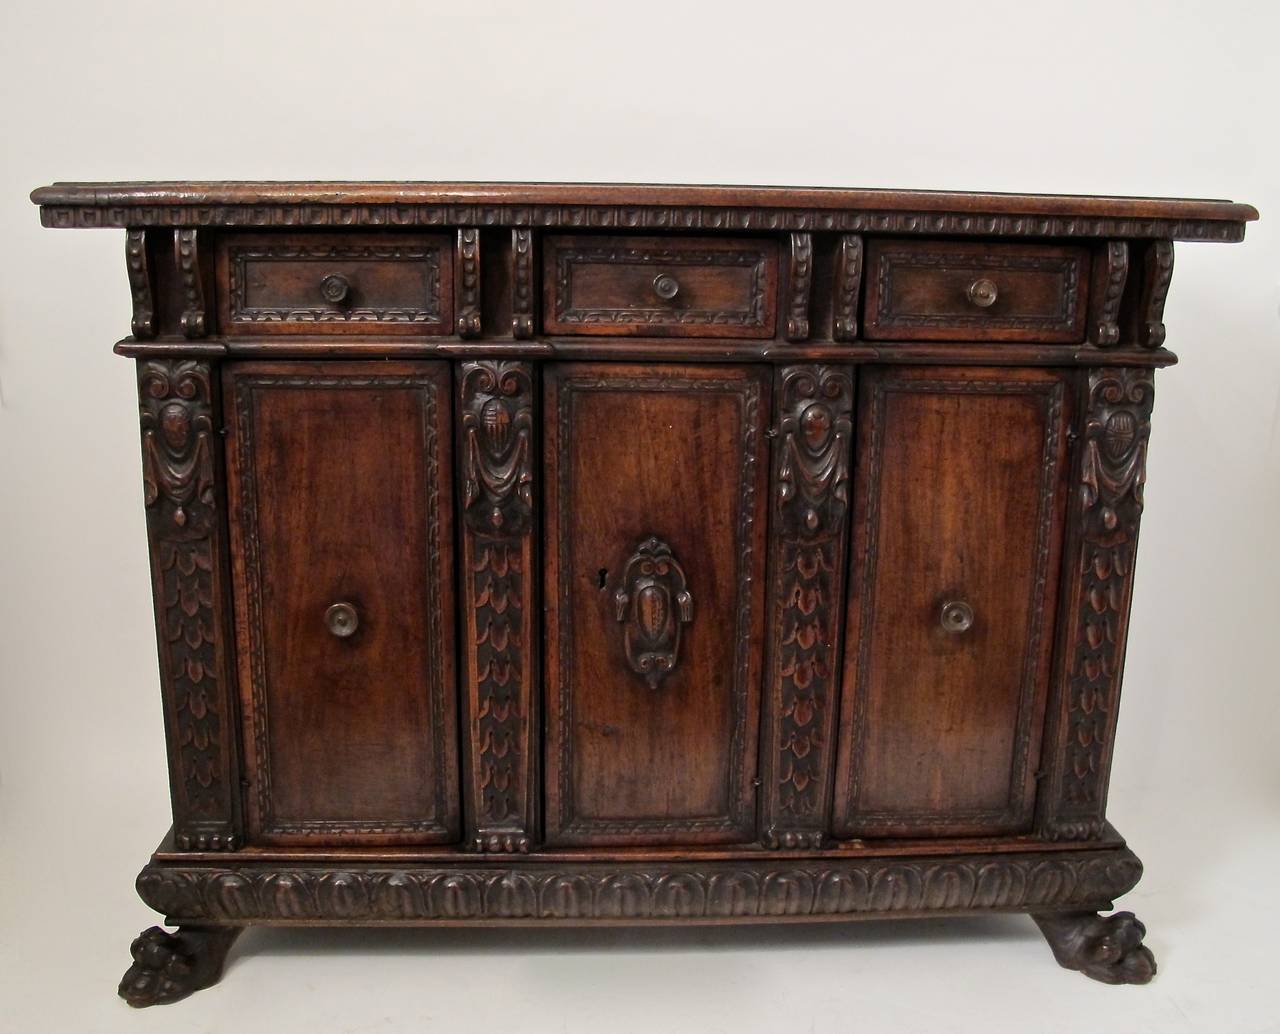 17th century (late Renaissance) Tuscan hand-carved walnut credenza or buffet. Very old if not original finish, minor old repairs and replaced parts, beautiful antique condition.